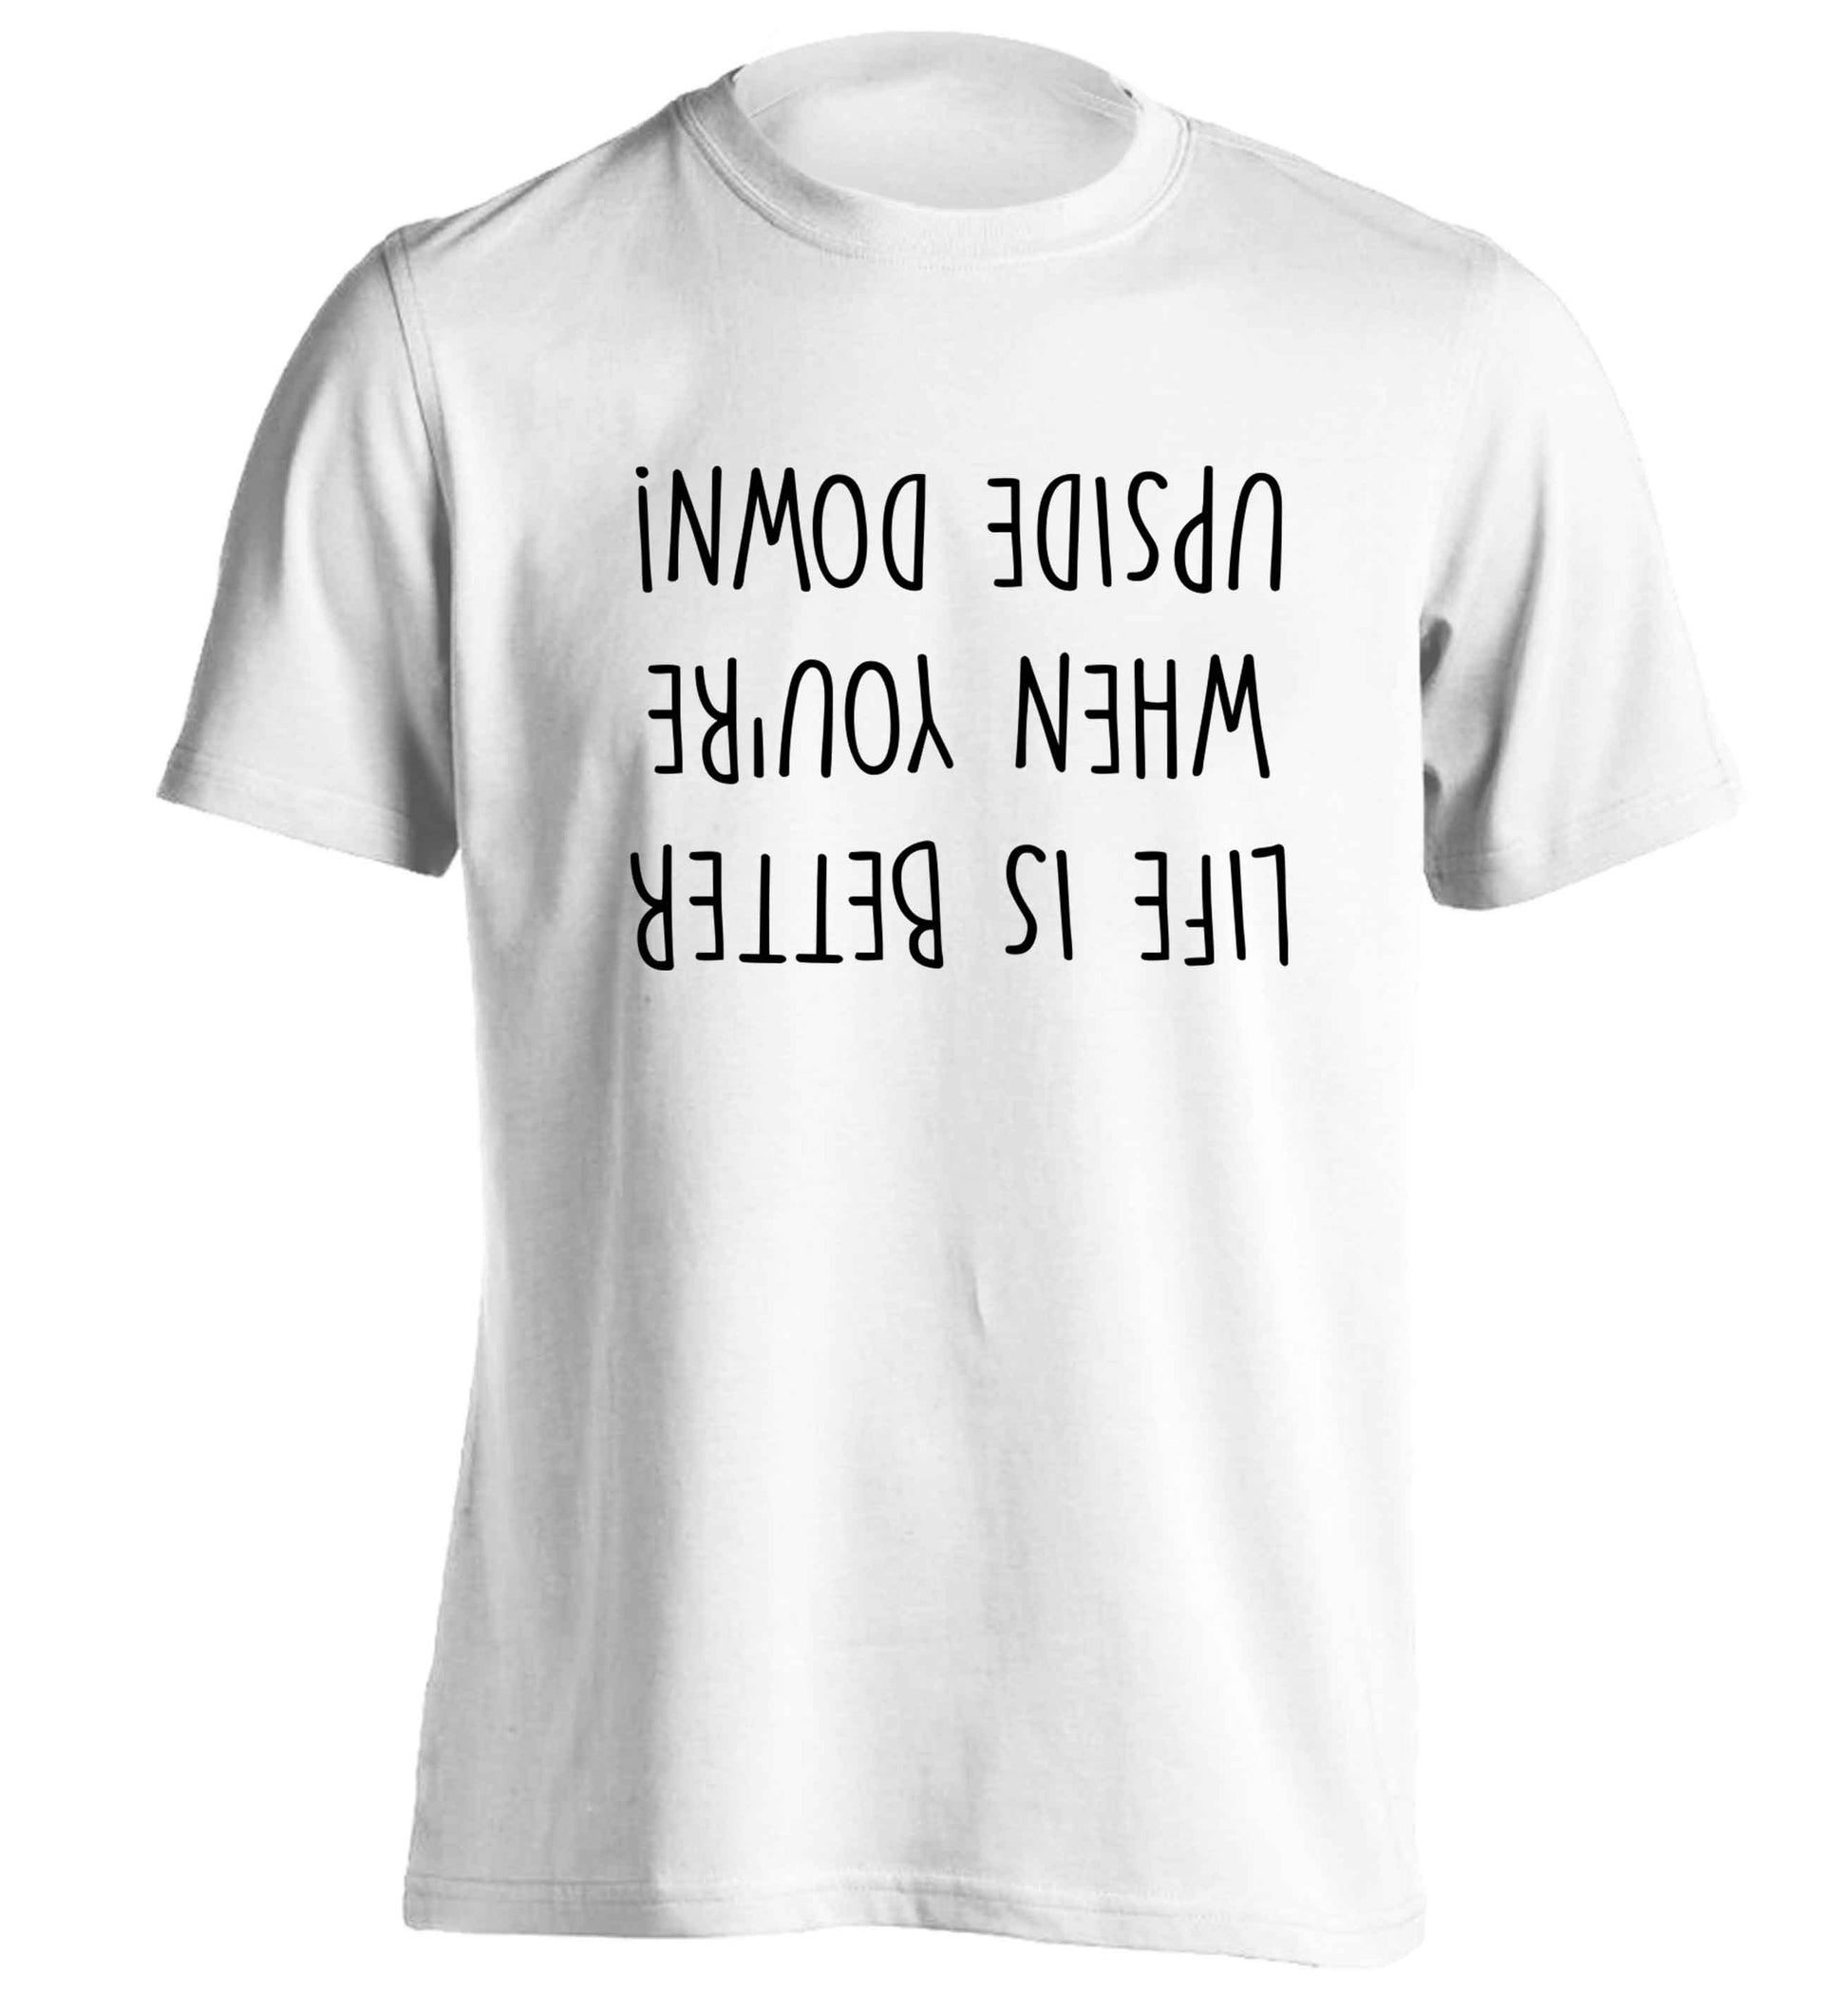 Life is better upside down adults unisex white Tshirt 2XL